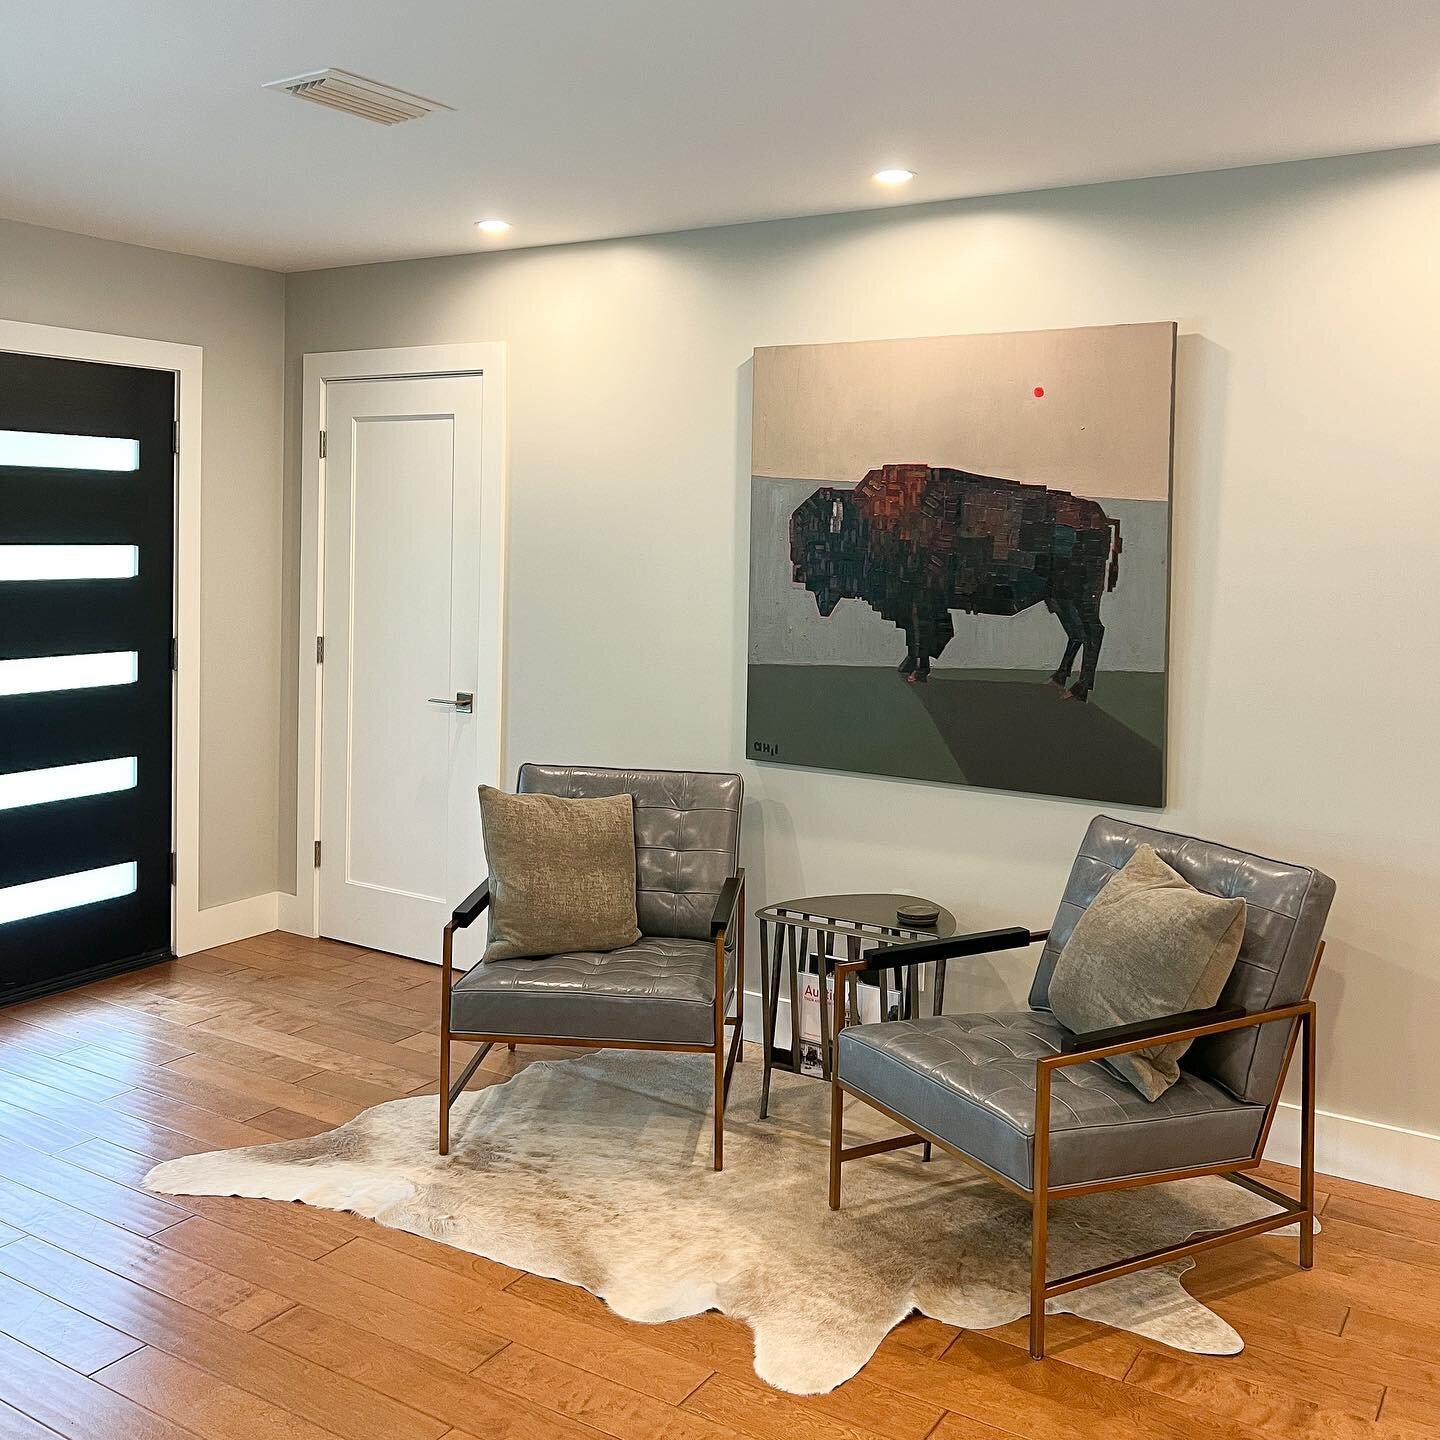 Loving a BIG Bison moment in this sitting area/entryway. Picked this piece up from @gallery.wild in Jackson Hole last month. Finally seeing it hanging!

&ldquo;Chappy&rdquo; - @ahaze2 
48&rdquo;x48&rdquo;